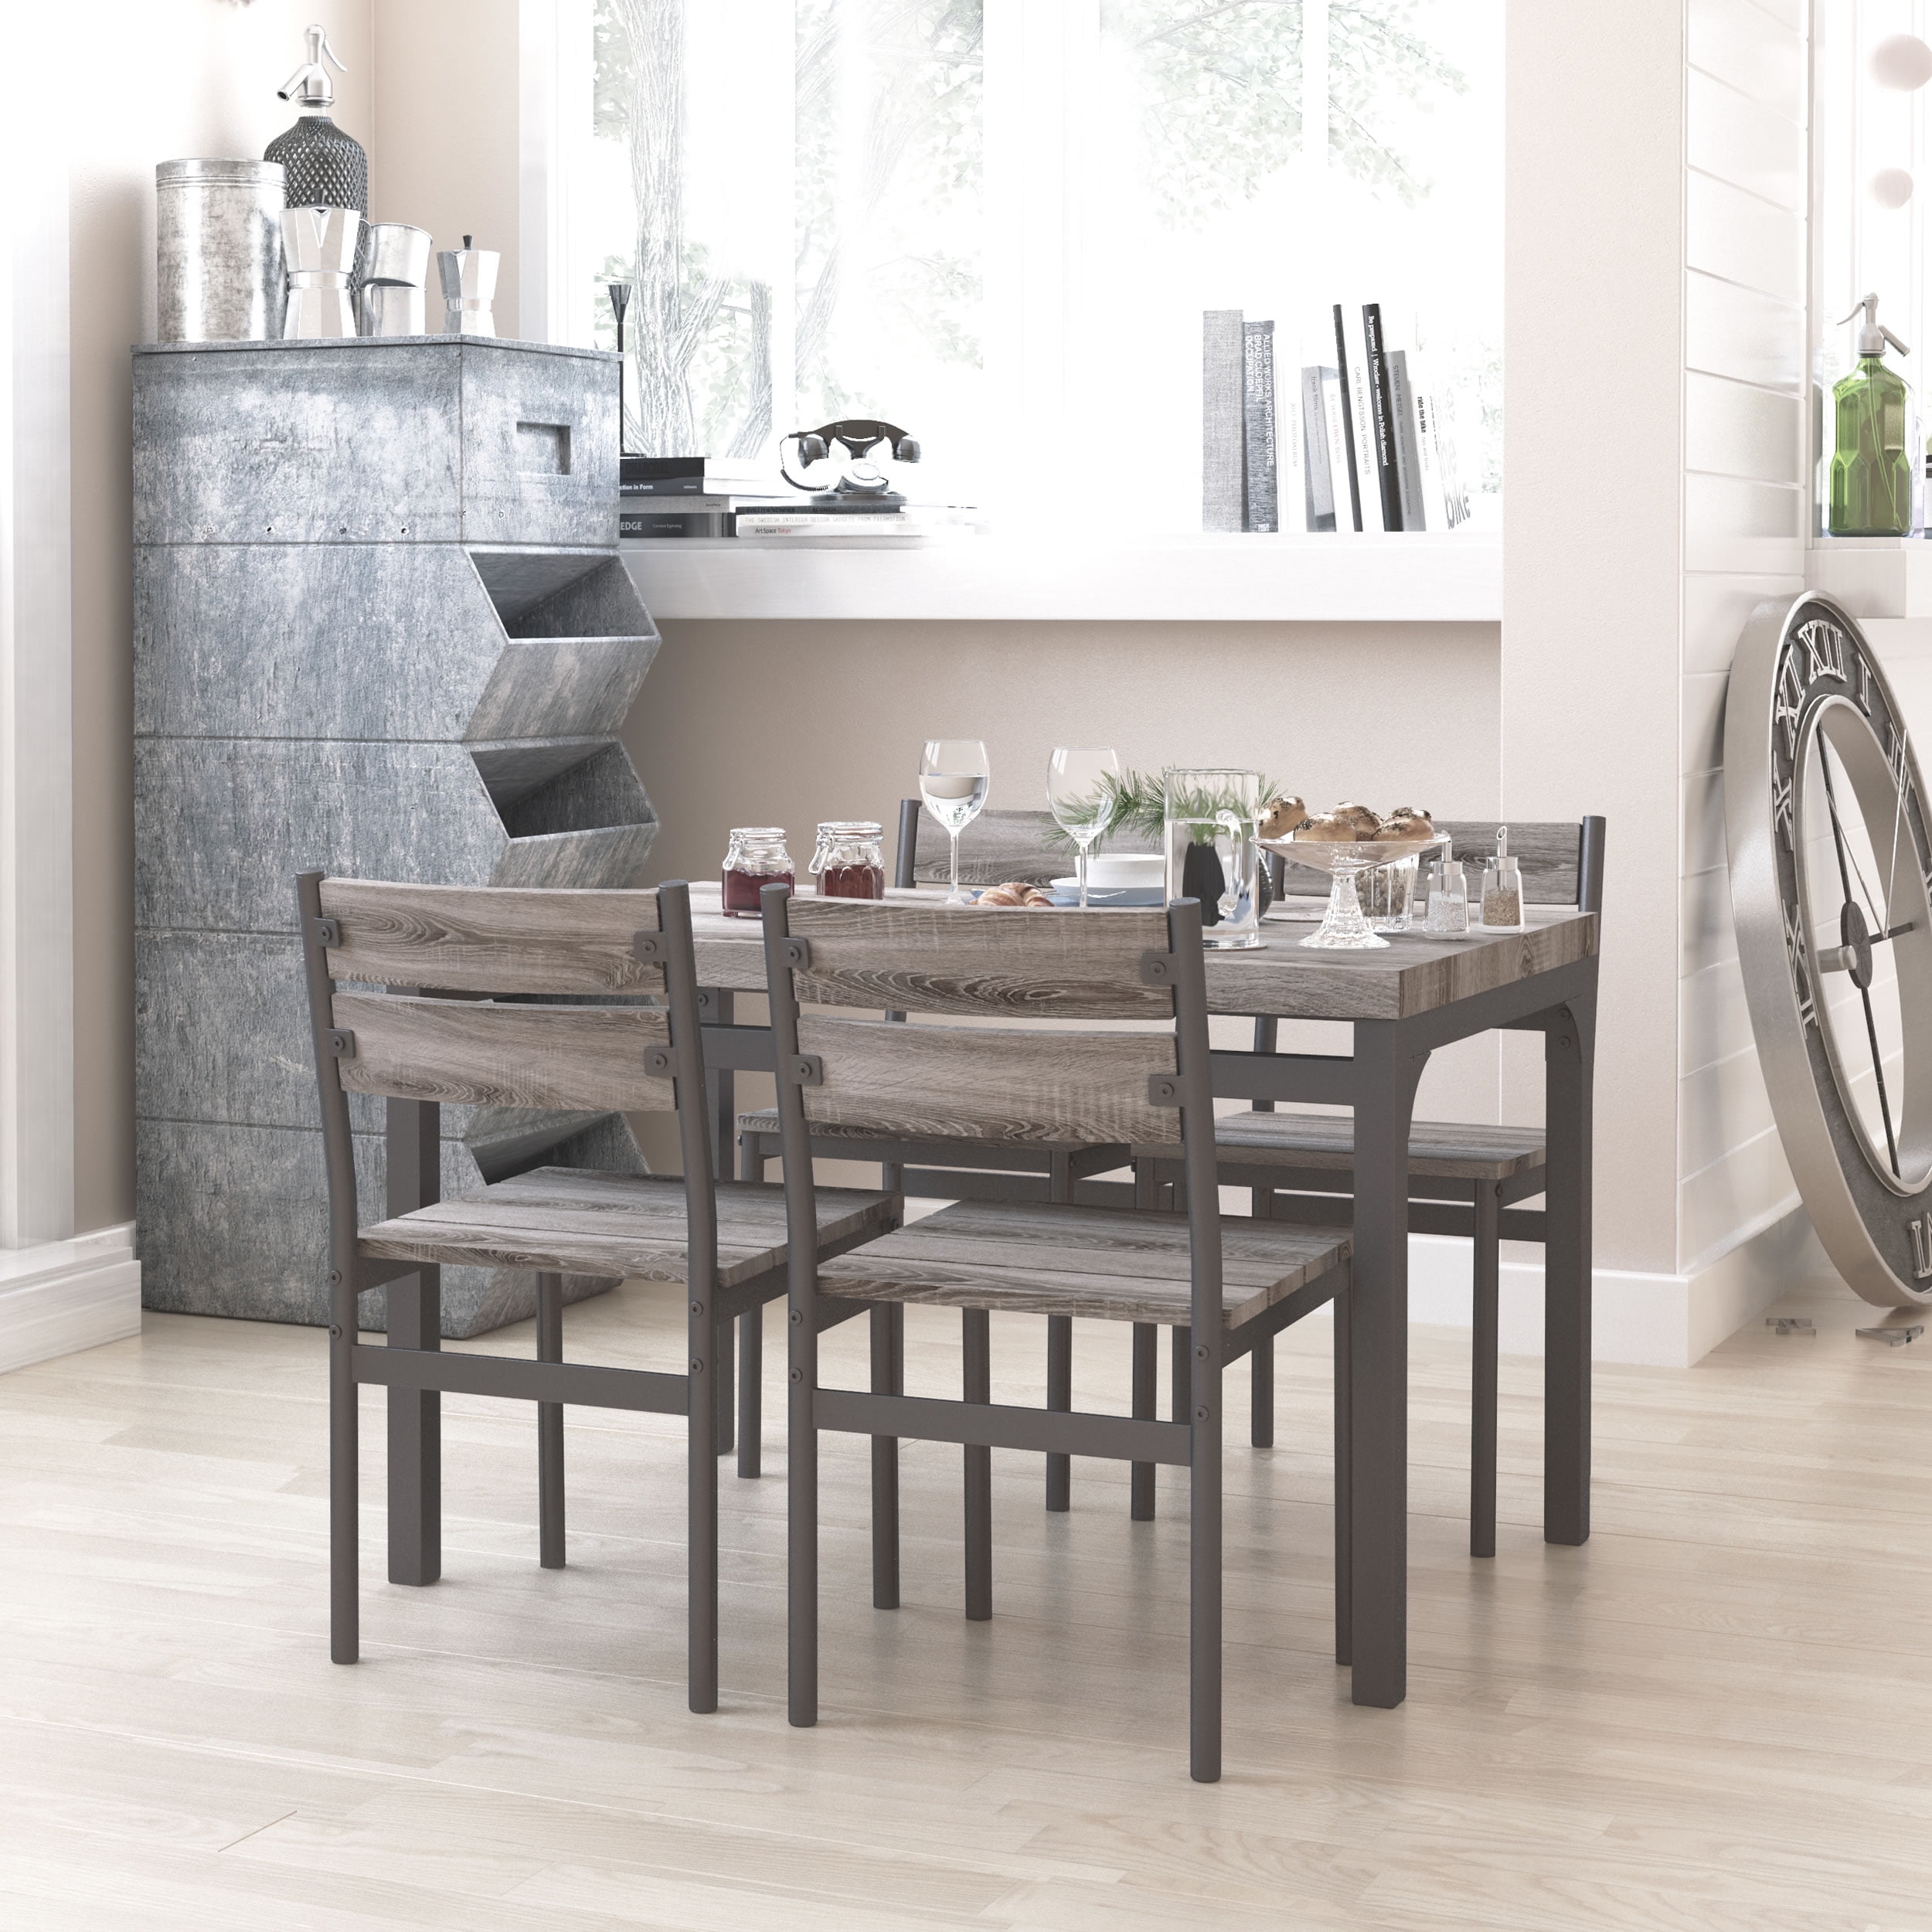 Zenvida 5 Piece Dining Set Rustic Grey Wooden Kitchen Table and 4